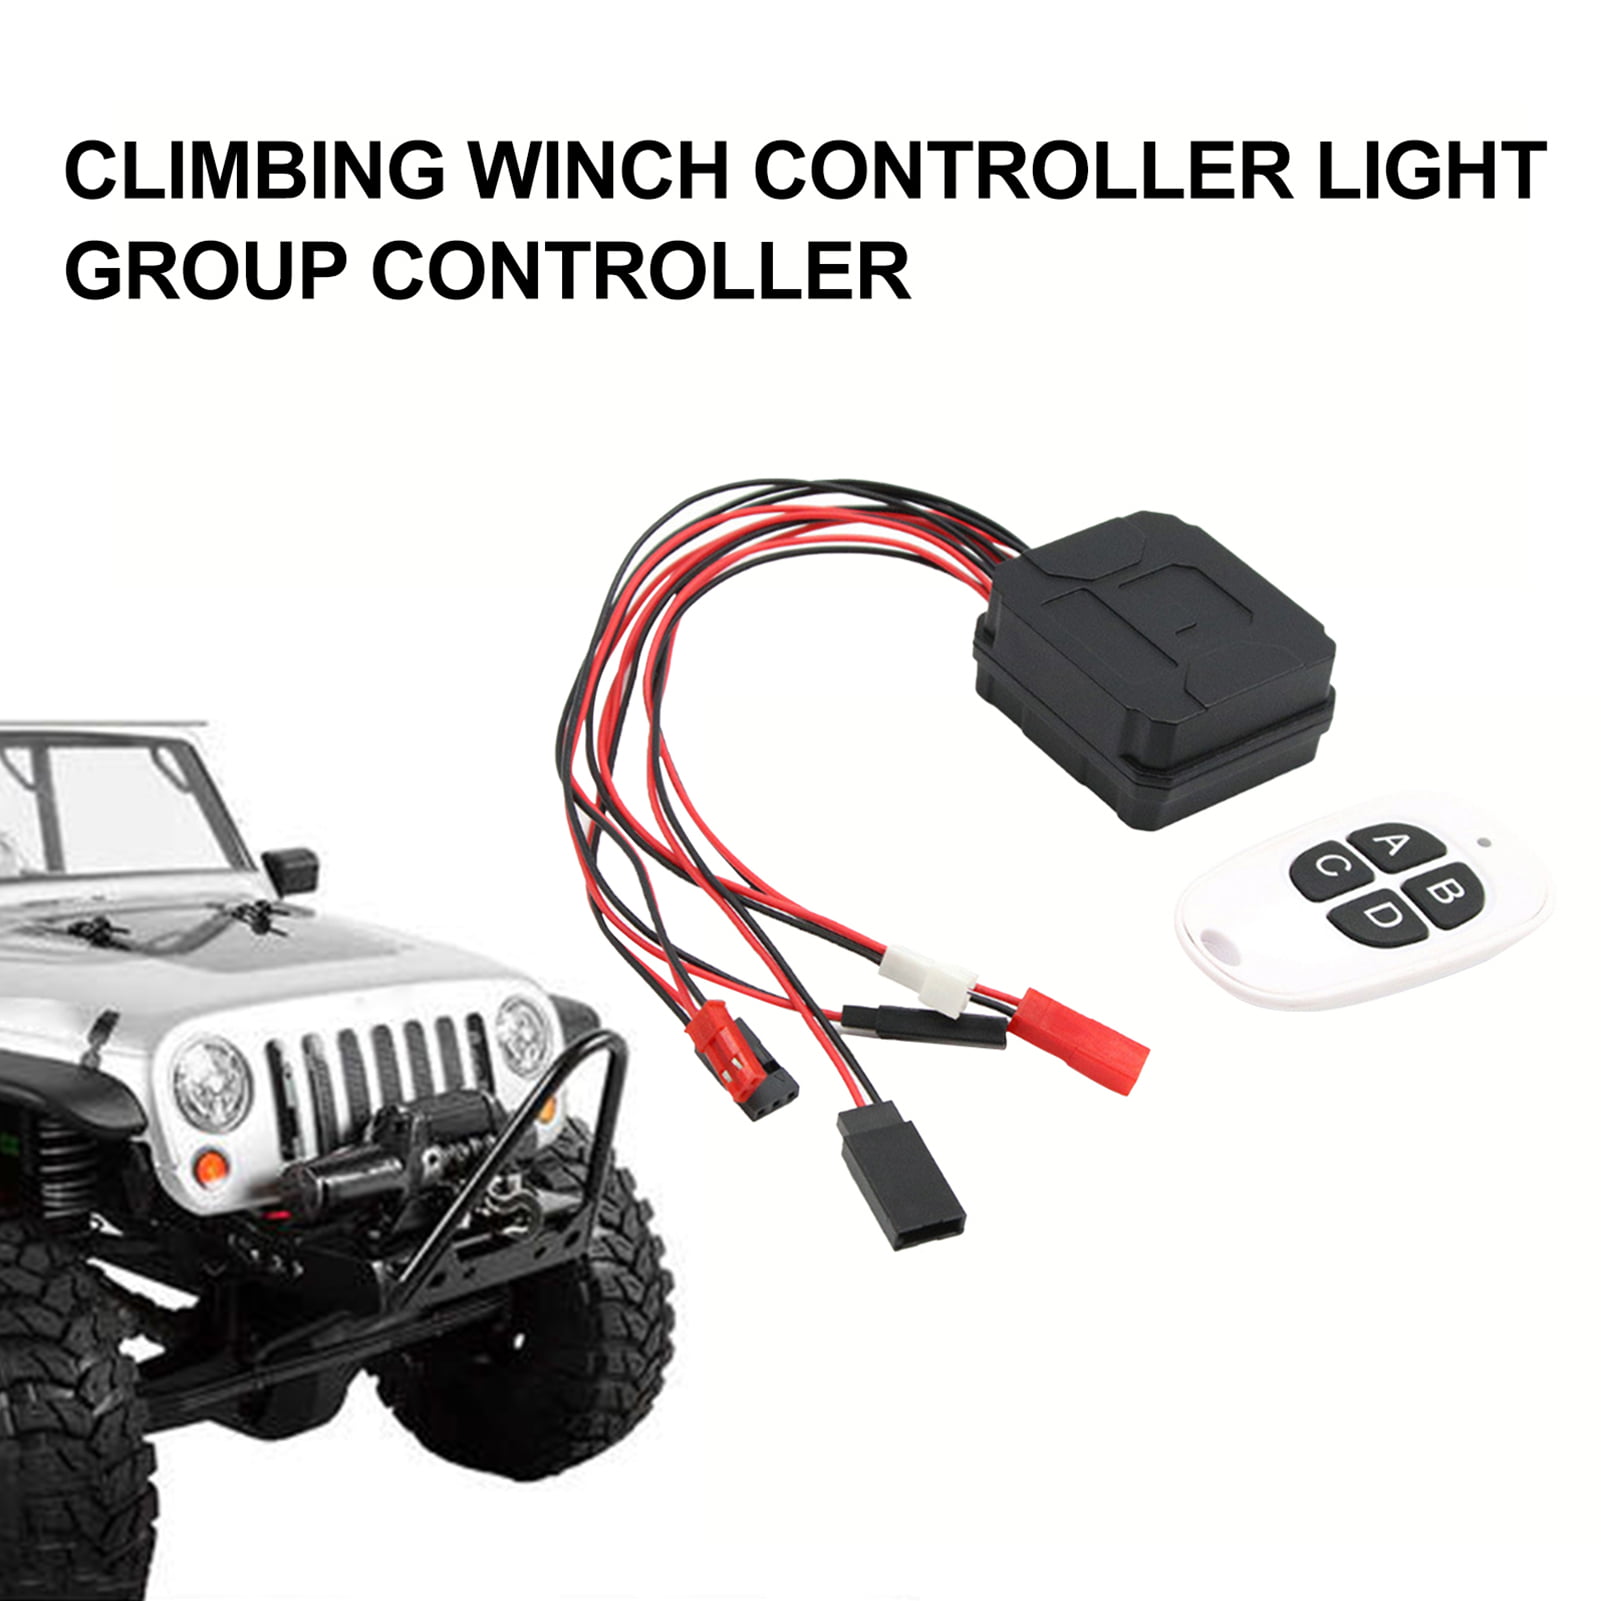 RC4WD Winch Controller Kit Climbing Winch Controller RC Receiver for RC4WD Trx-4 SCX10 